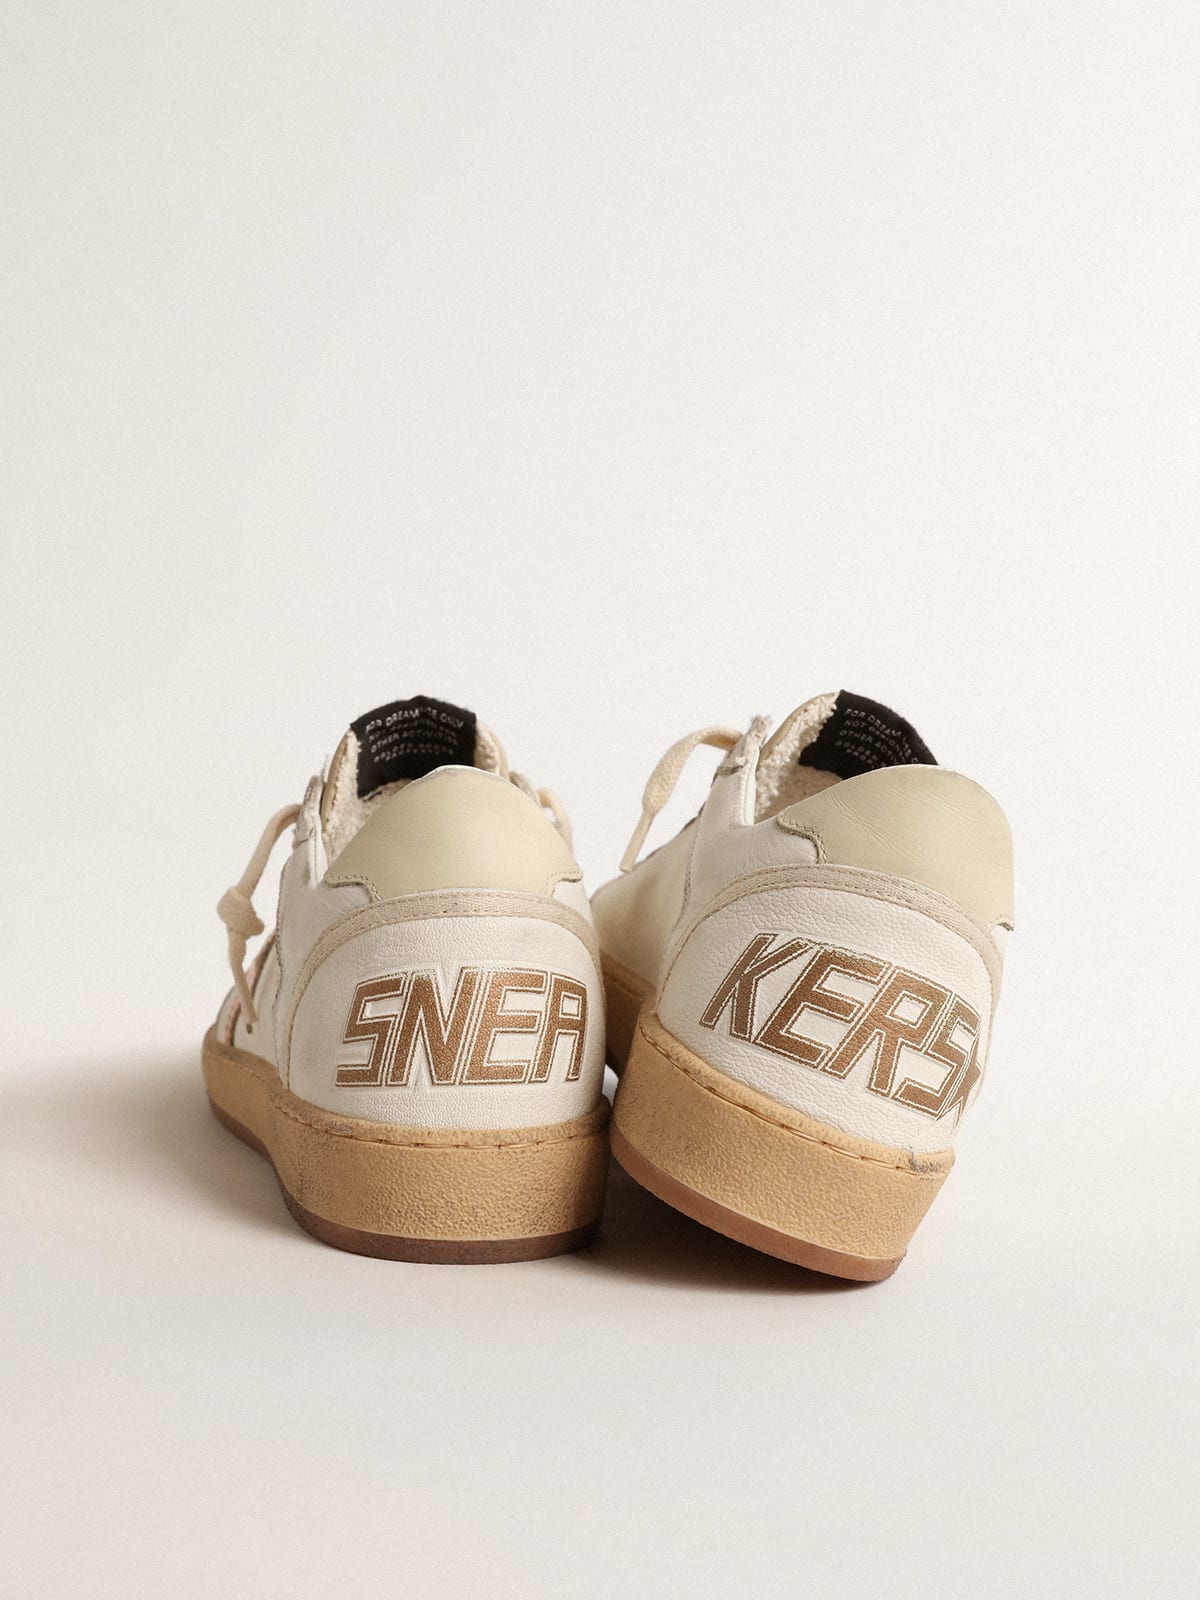 Golden Goose - Ball Star LTD in canvas and nappa with bronze metallic leather star in 